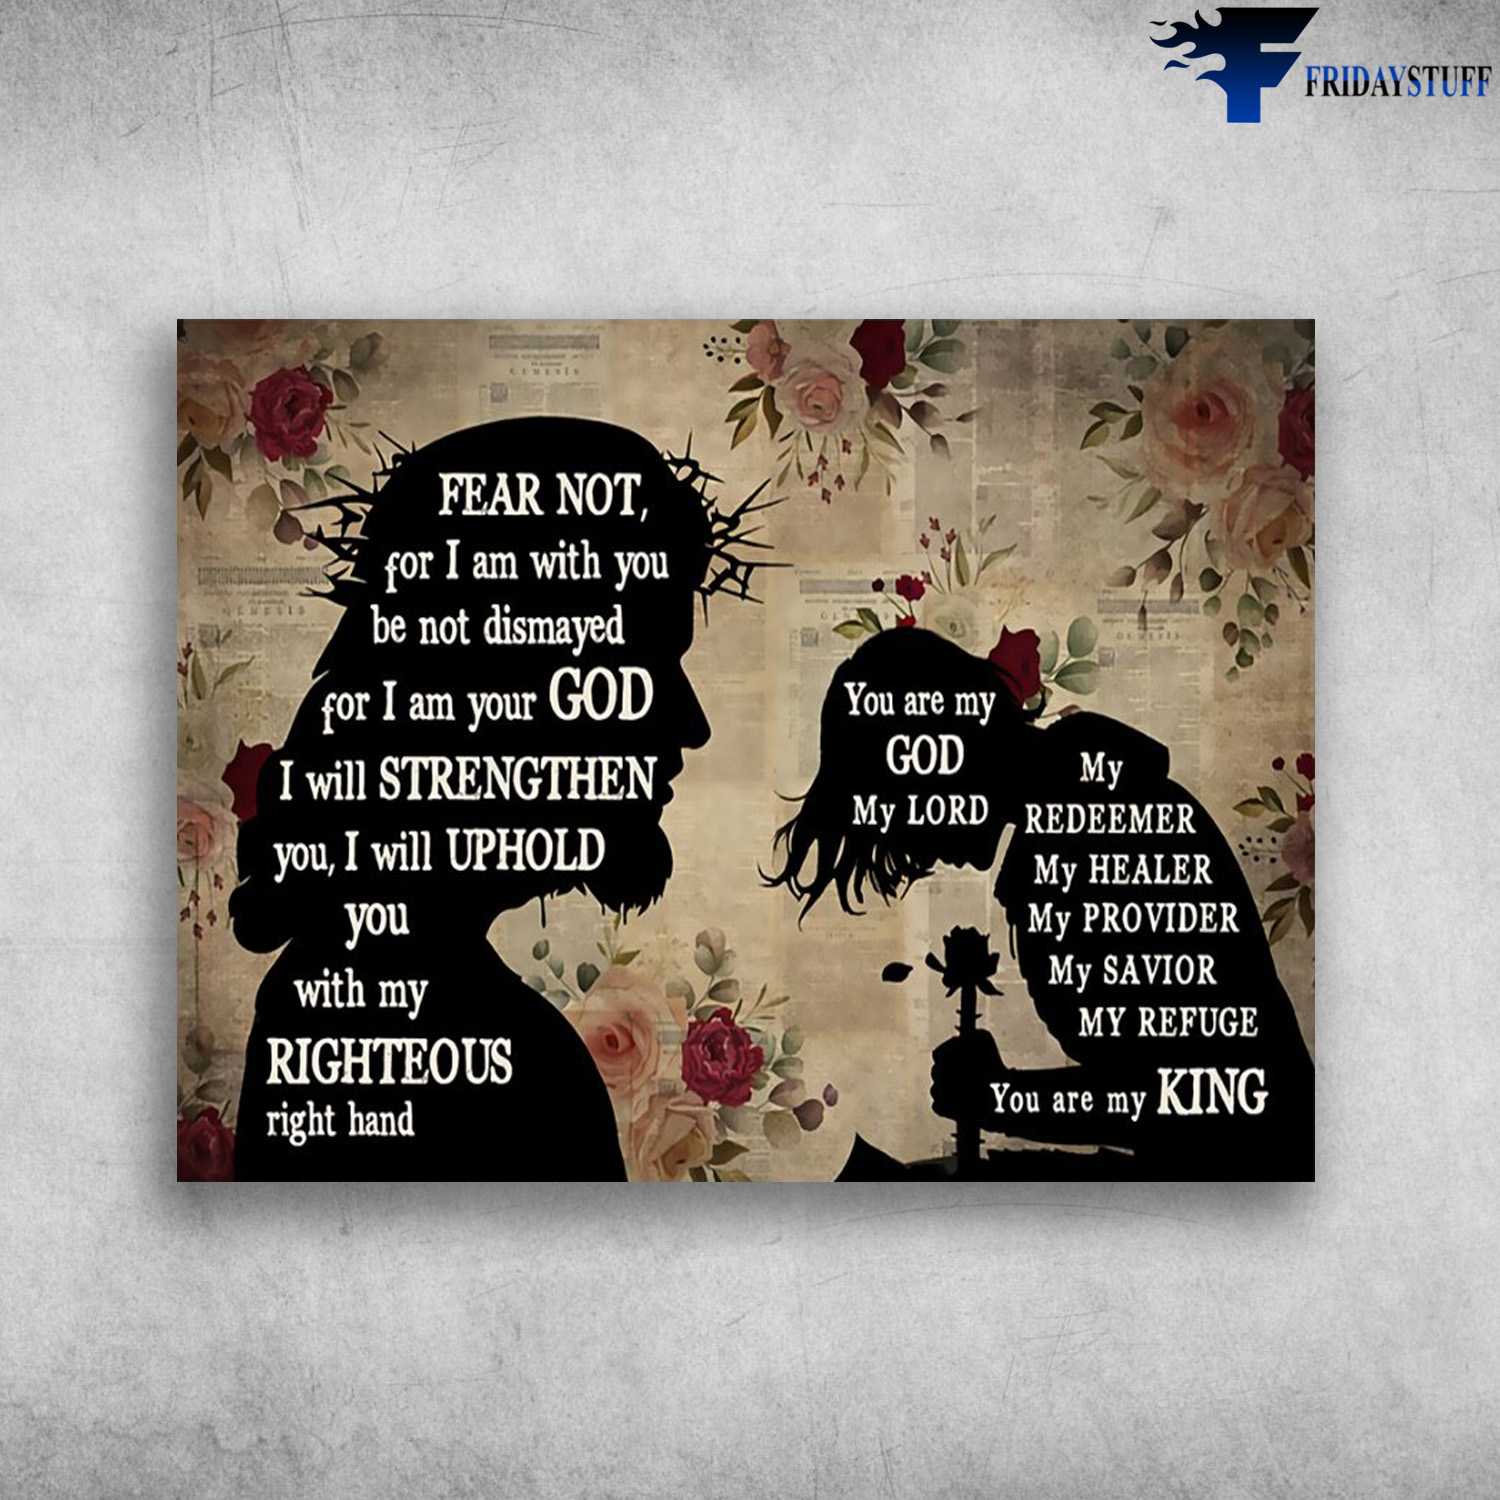 God And Daughter, Fear Not, For I Am With You, Be Not Dismayed For I Am Your God, I Will Strengthen You, I Will Uphold You, With My Rightteous Right Hand